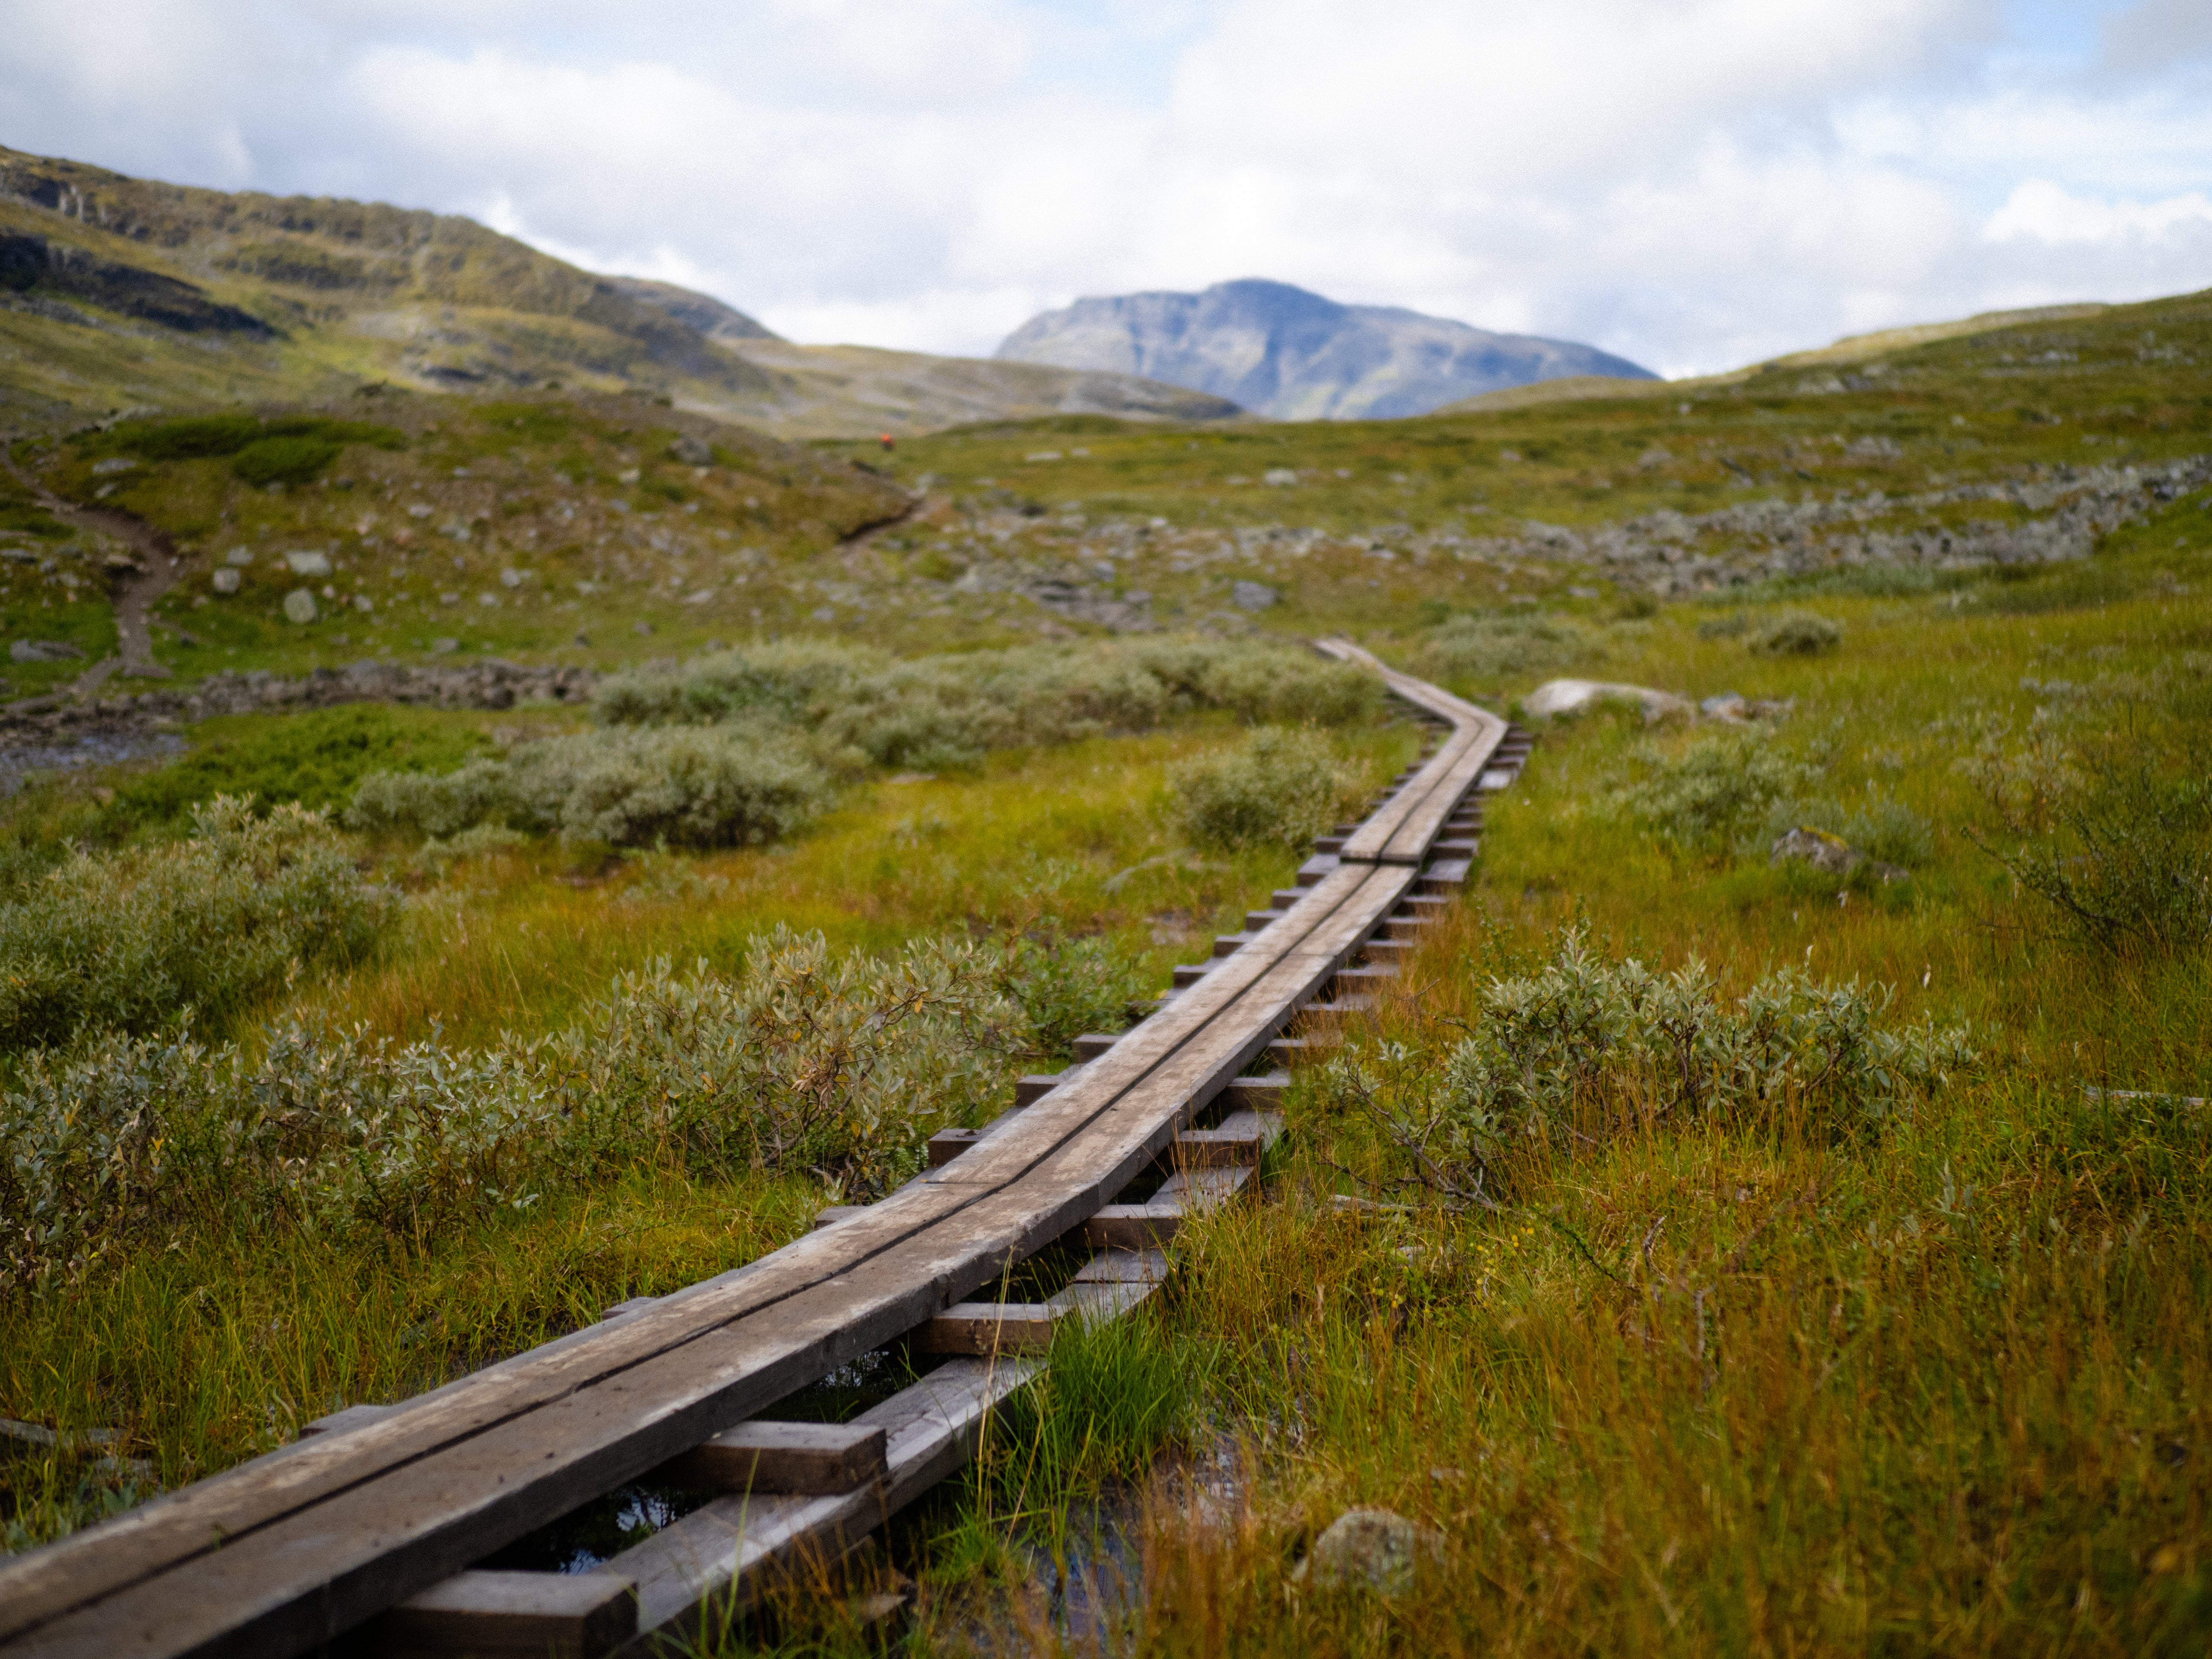 The Kungsleden Trail is a mixture of rocky footpaths and wooden boards to cross sodden terrain